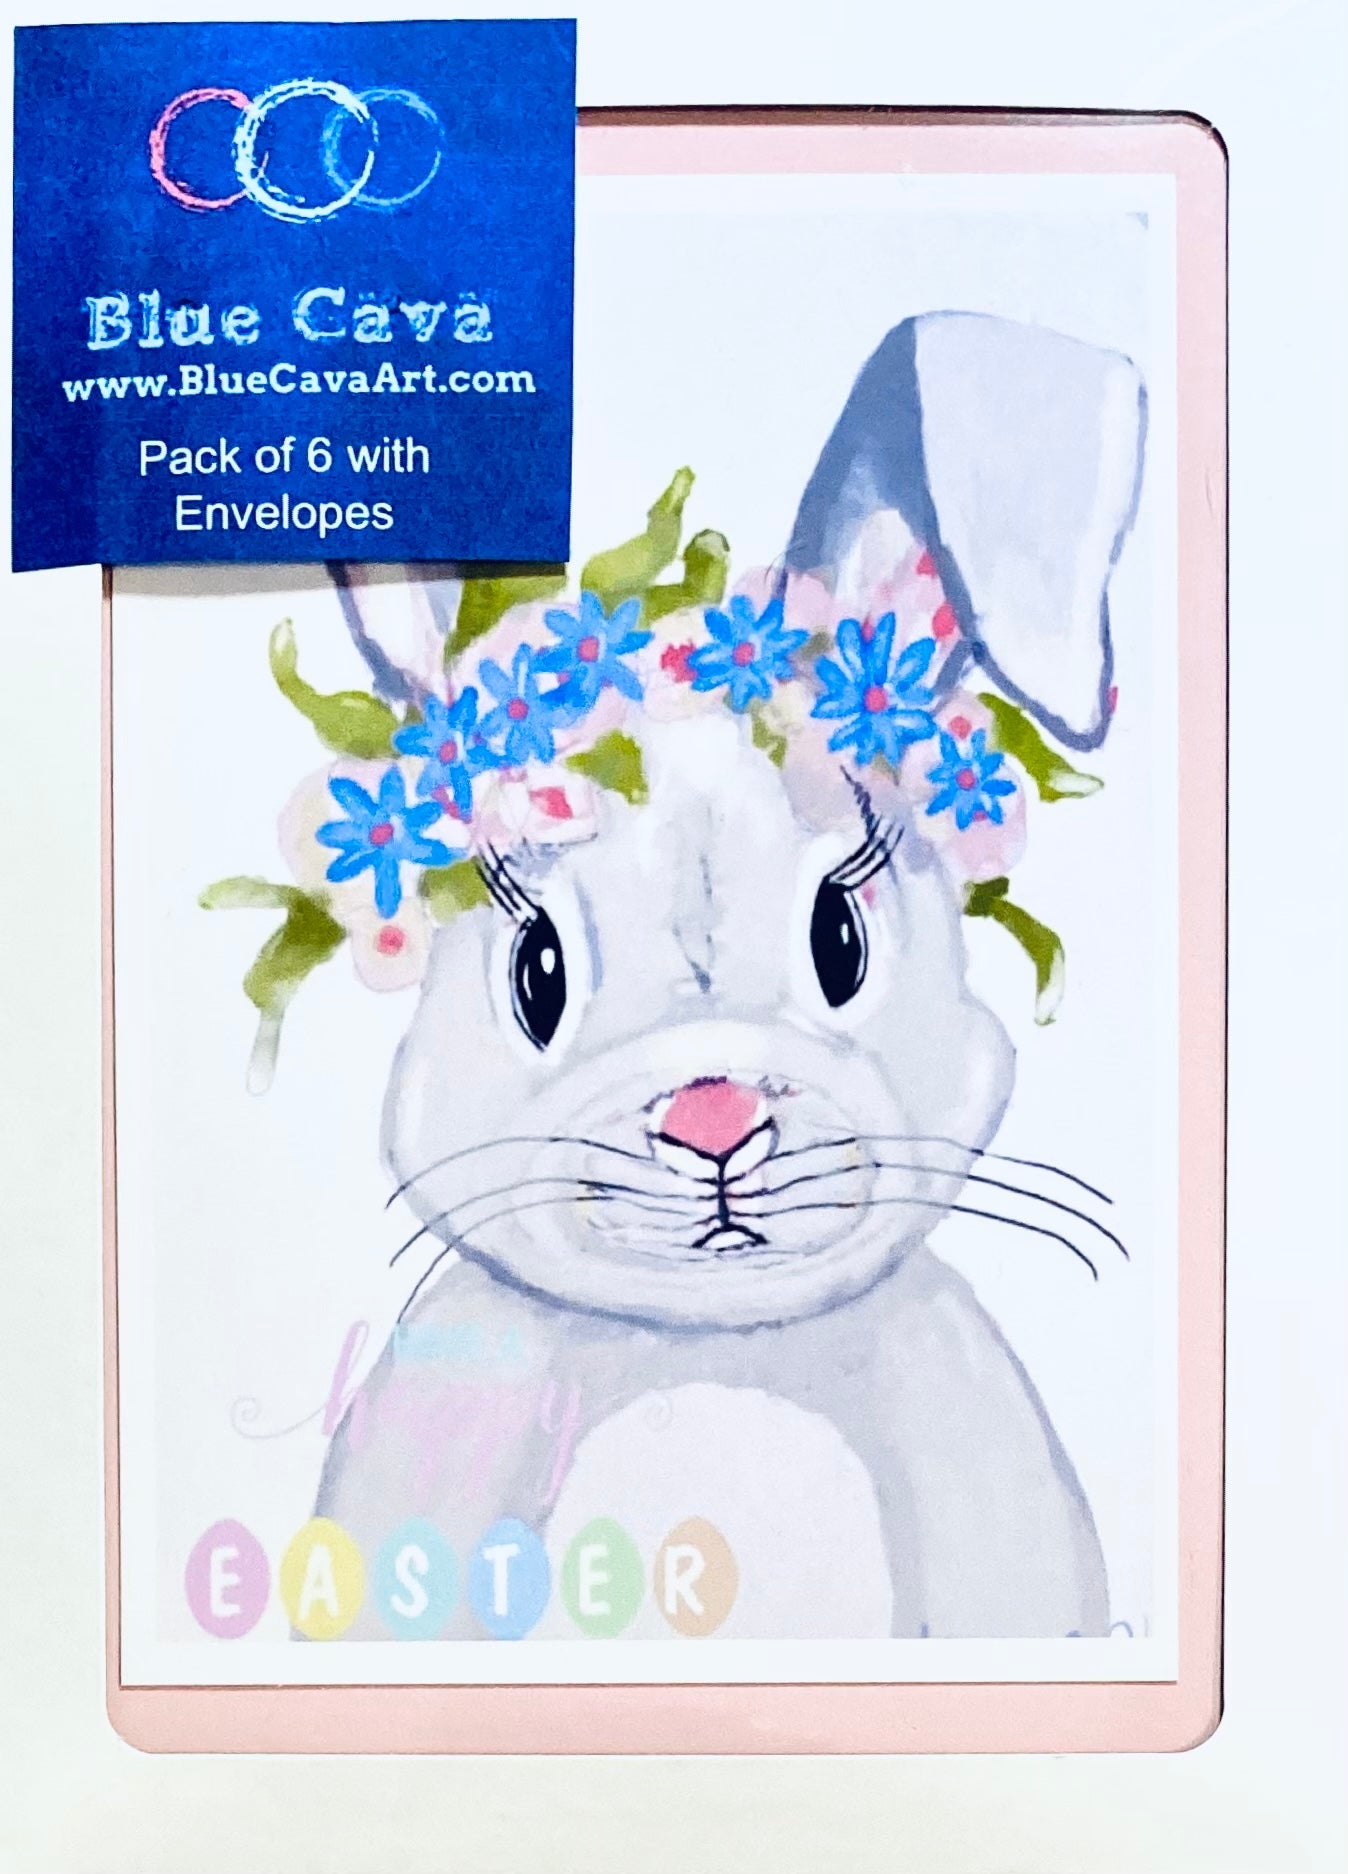 Happy Easter Greeting card - Blue Cava